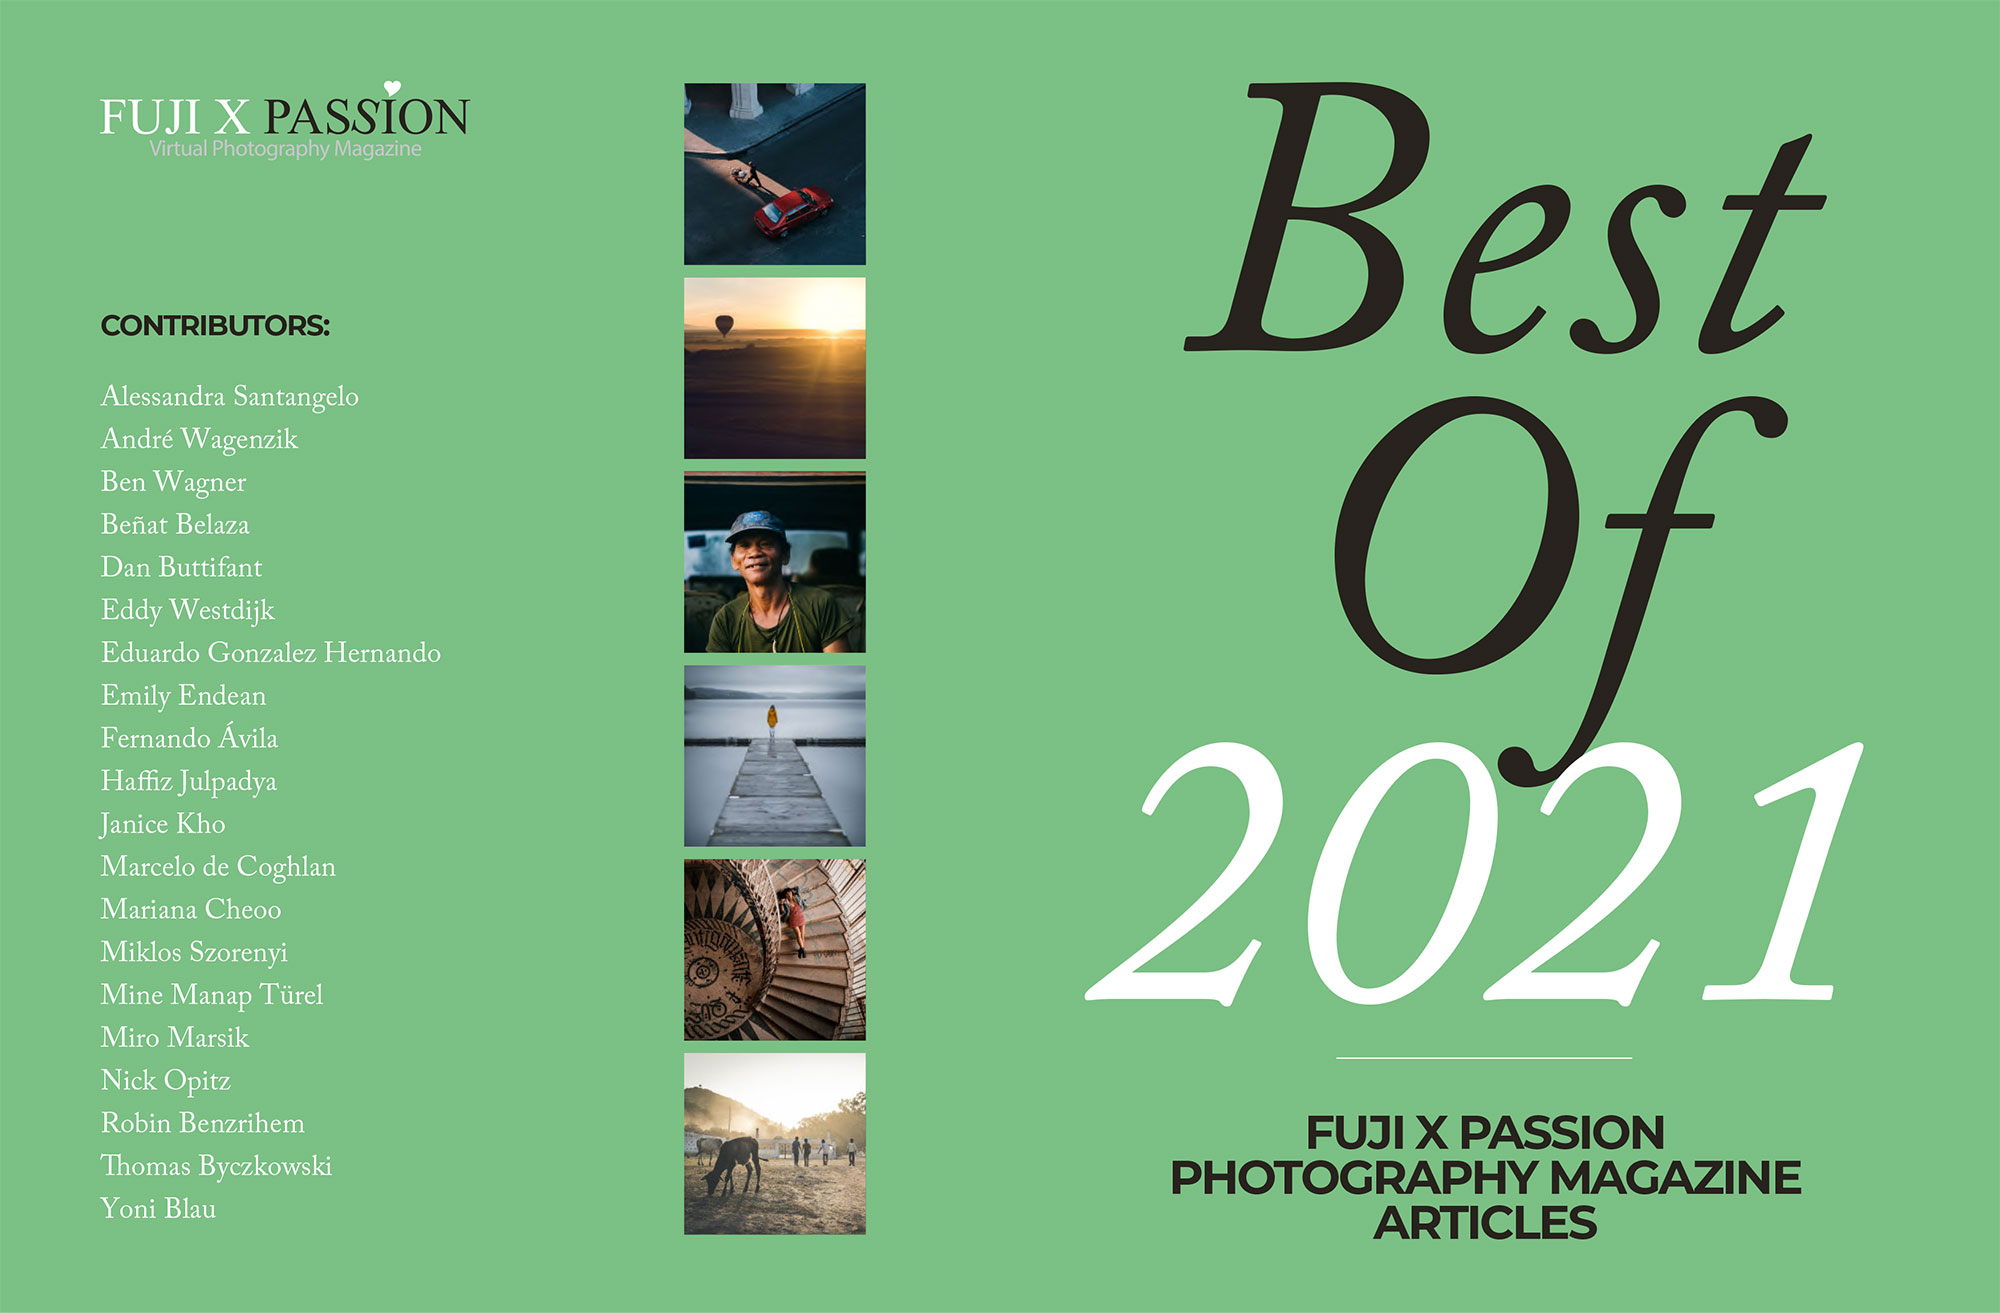 “Best Of” Fuji X Passion Magazine – a Special Edition for the Summer 2021!